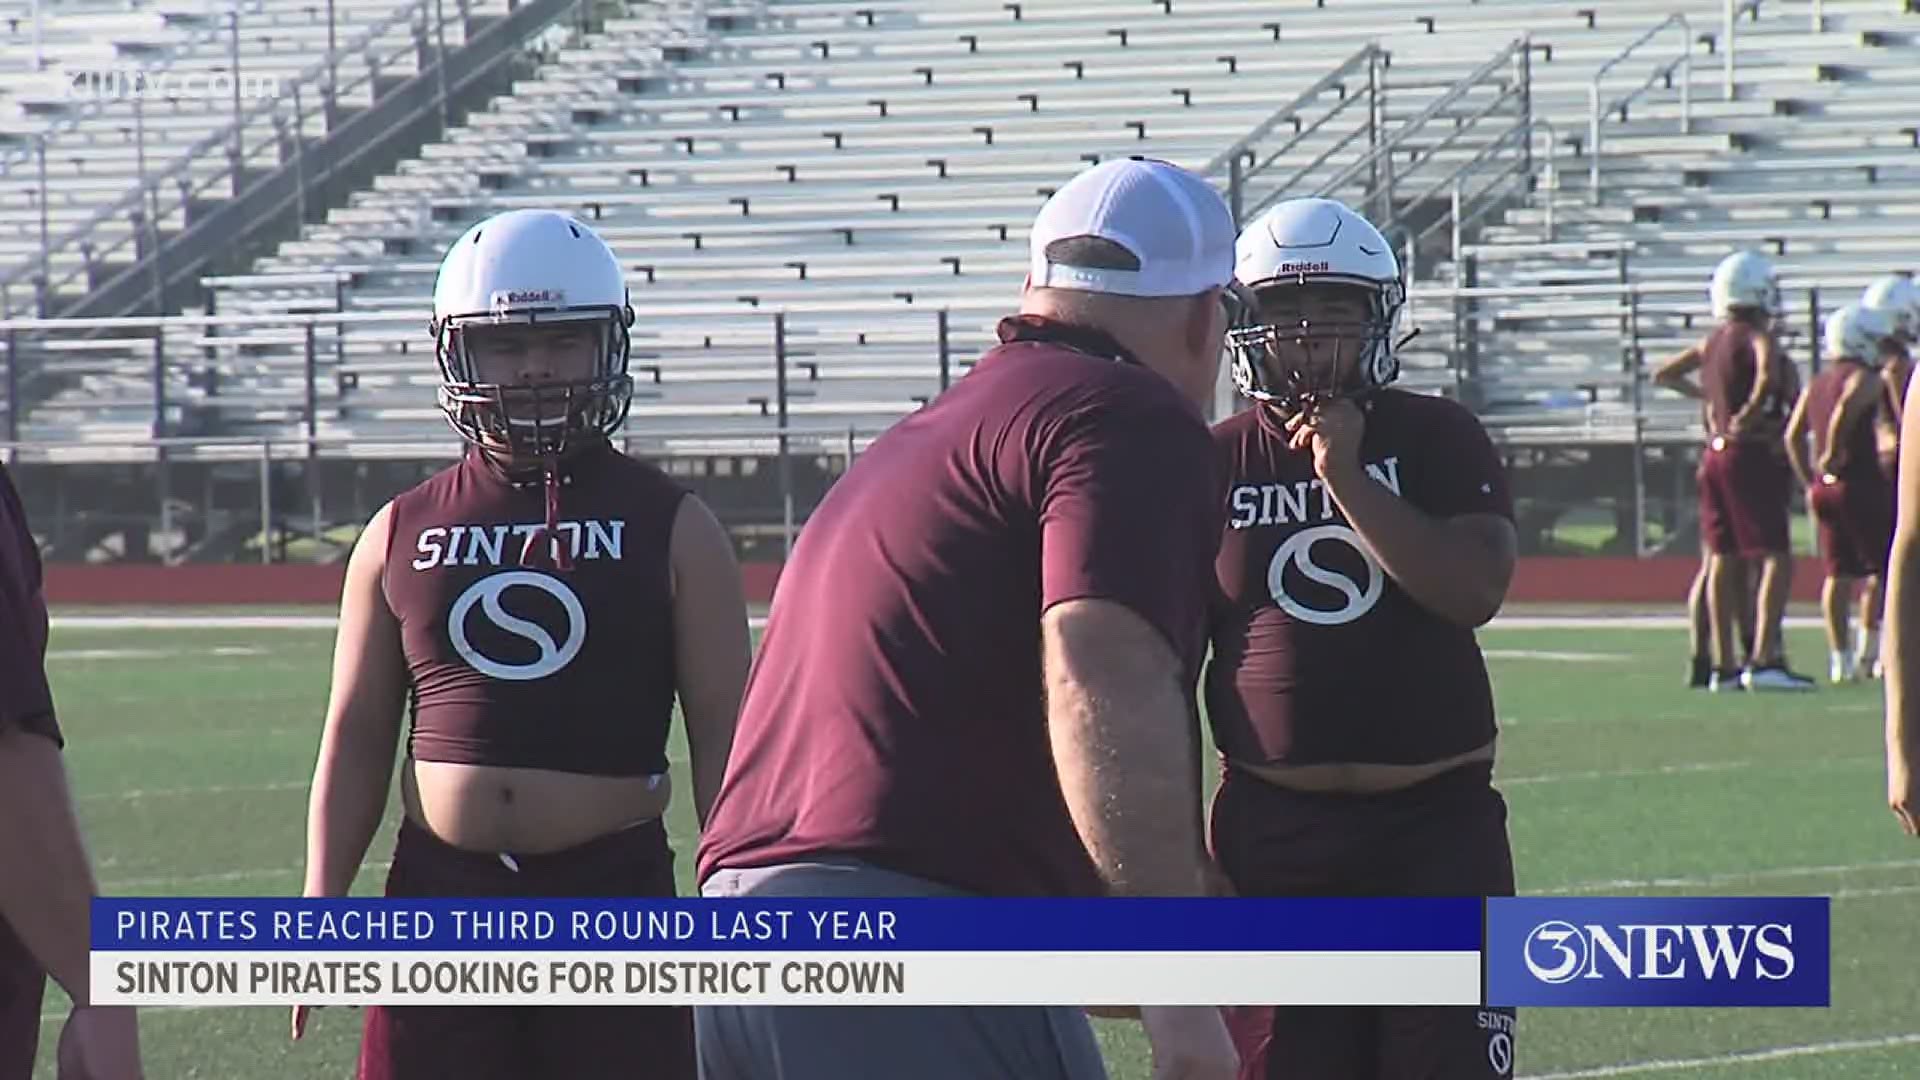 The Sinton Pirates are always one of the most consistent teams in the viewing area and they've got some big expectations in 2020.